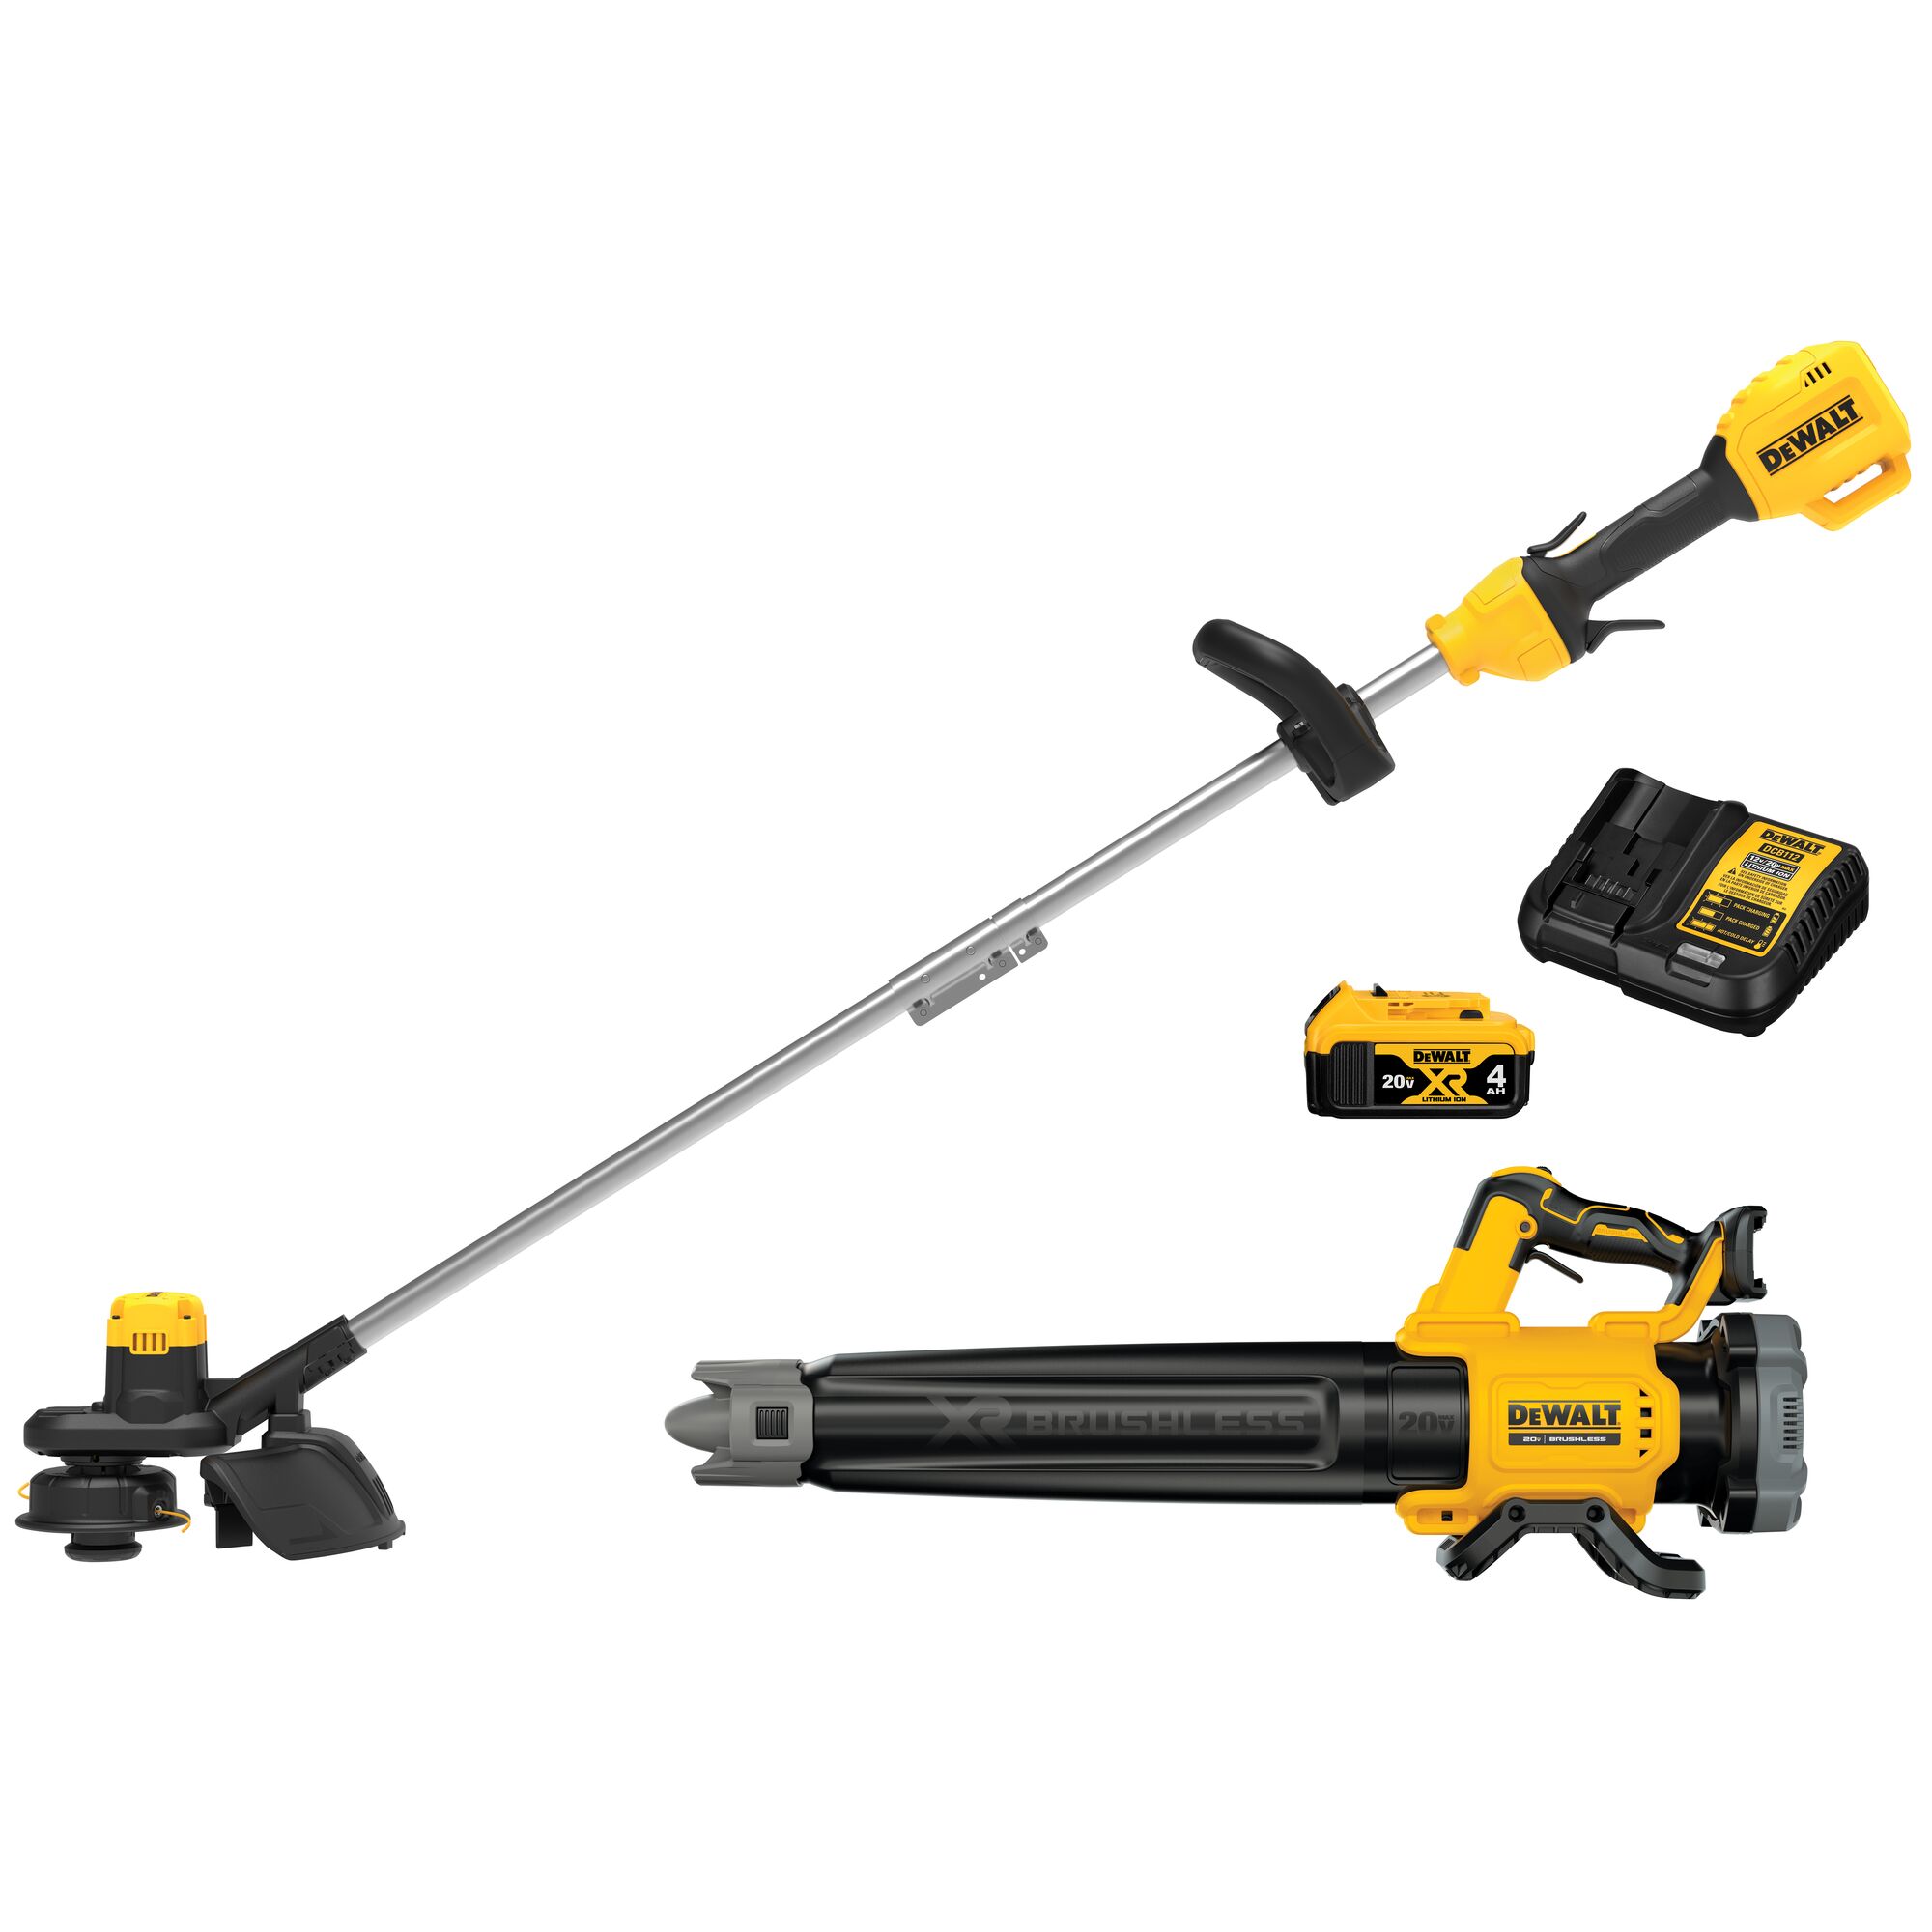 DEWALT 20V MAX Cordless Lithium-Ion String Trimmer/Blower Combo Kit  (2-Tool) with 4.0Ah Battery Pack and Charger Included DCKO975M1 - The Home  Depot